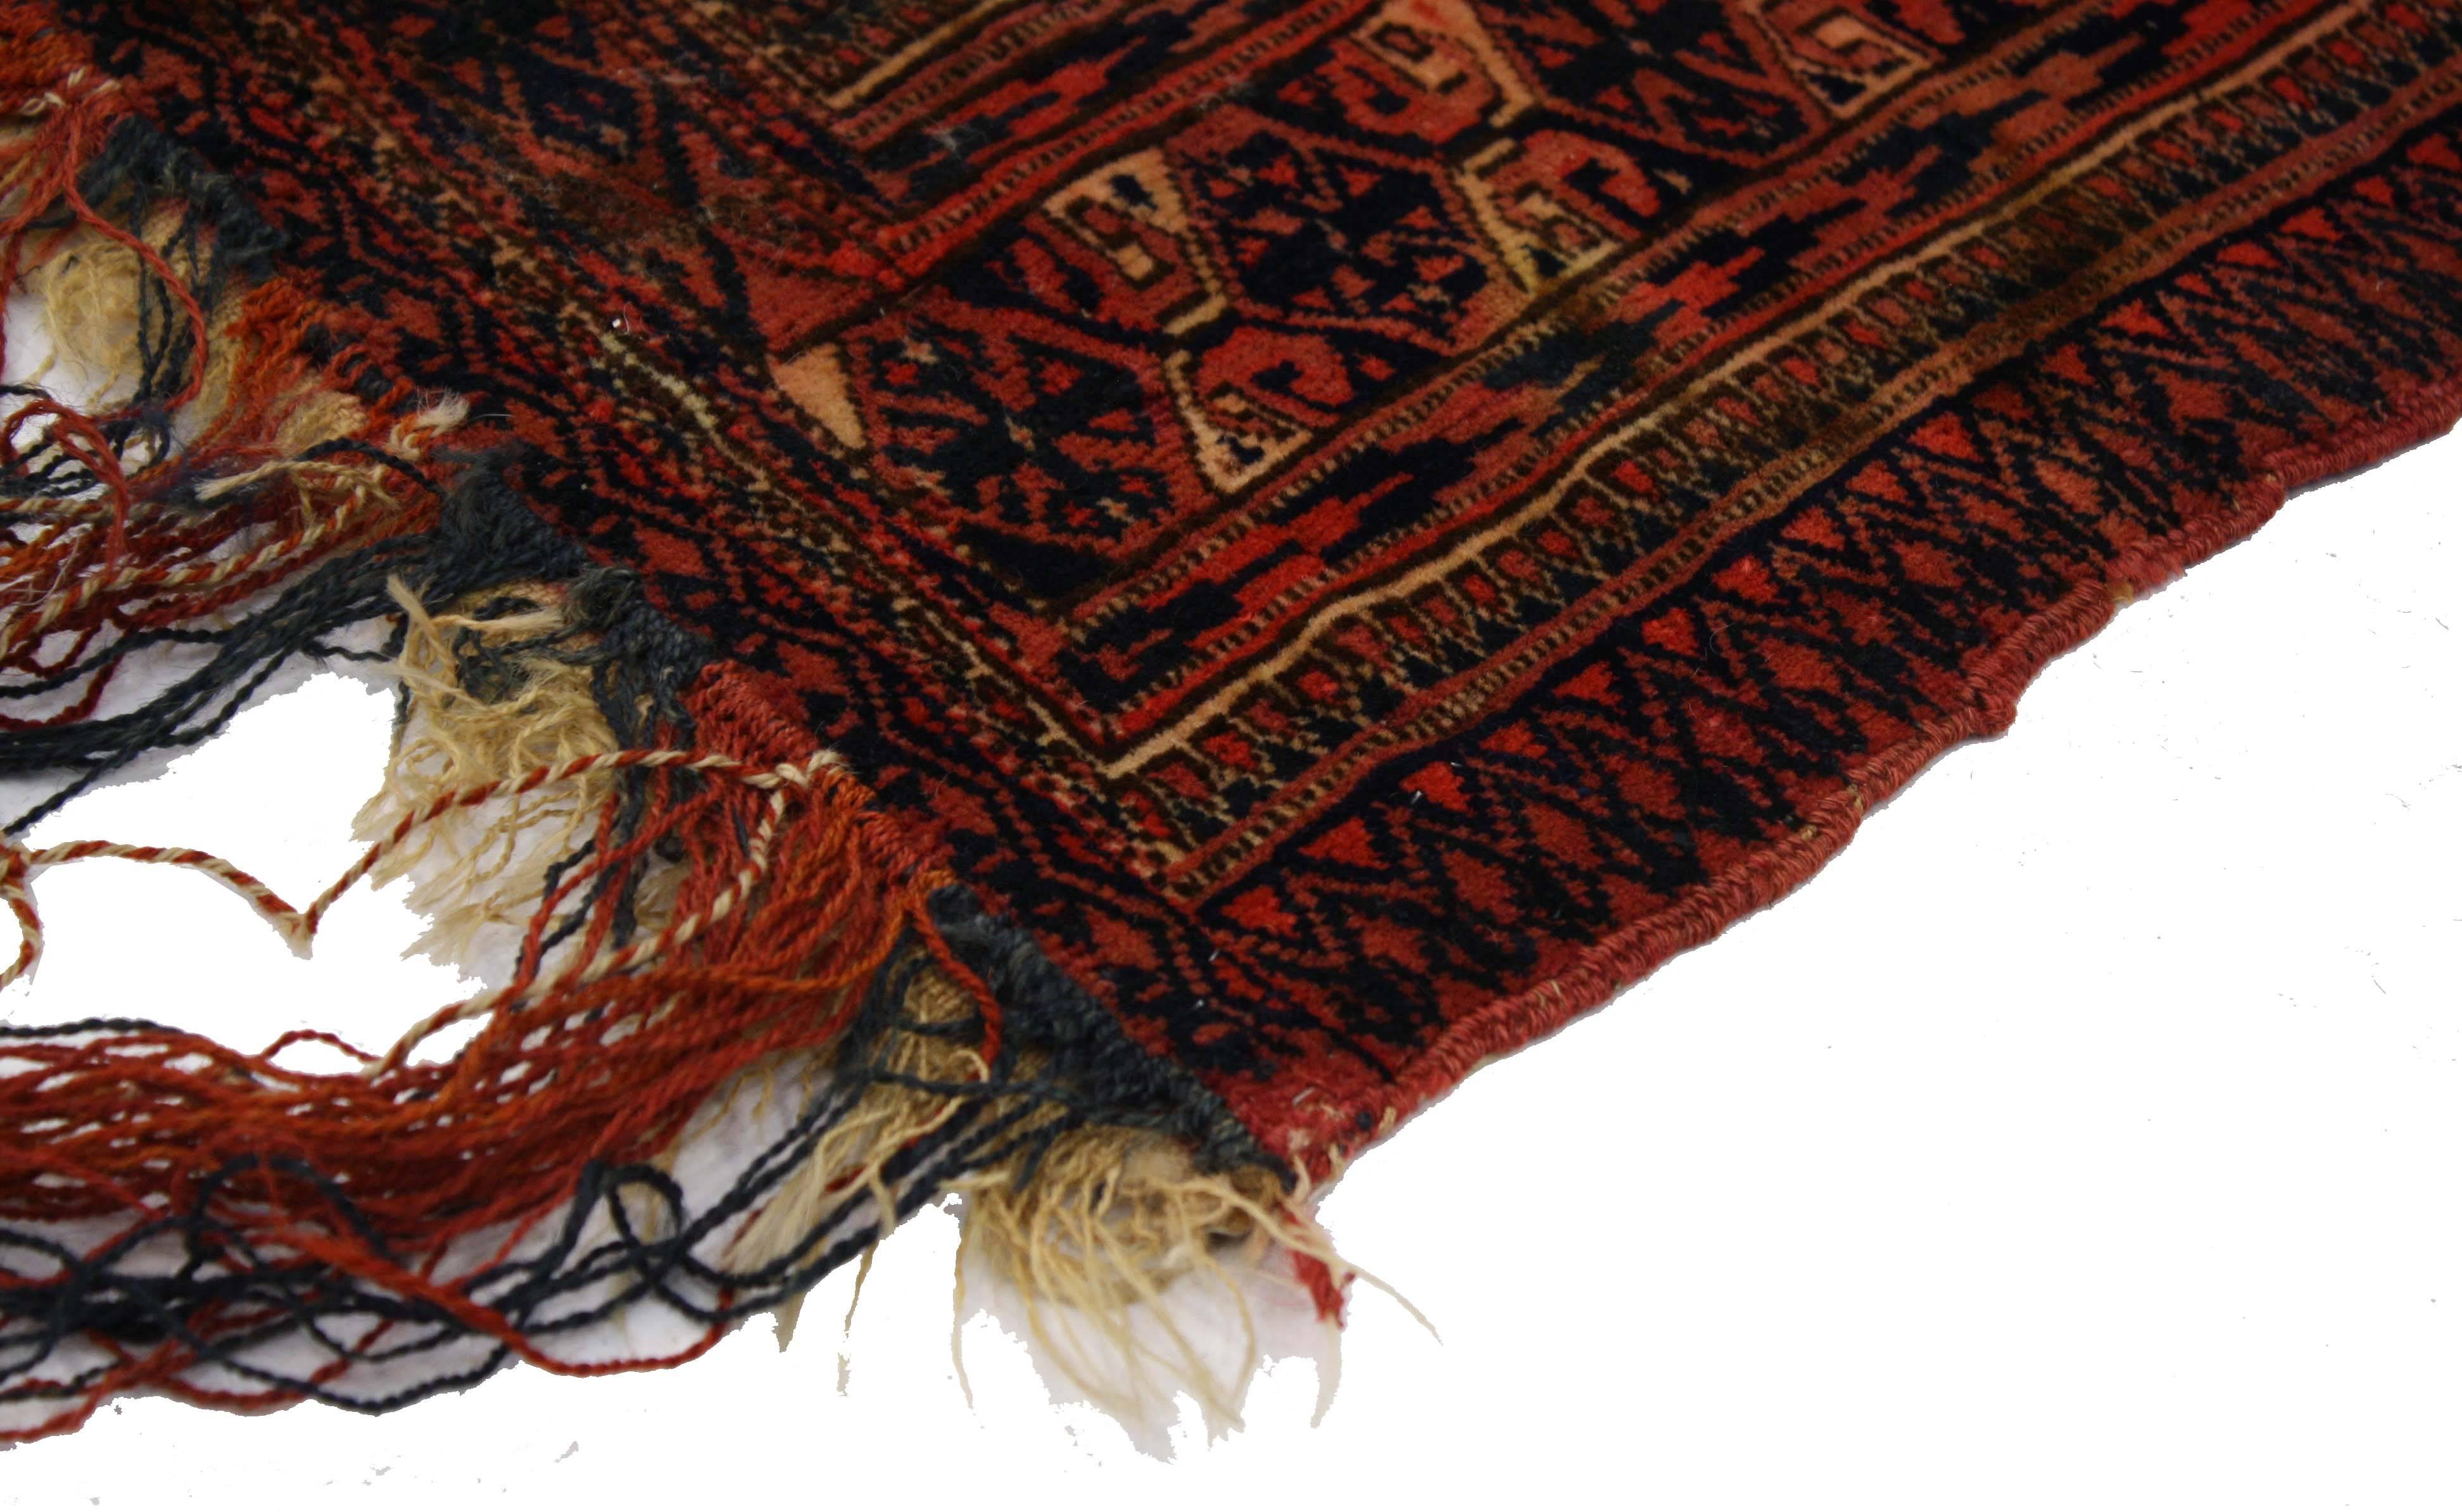 76641, antique Afghan Turkoman Turkmen Torba bag, wall hanging, tribal textile tapestry. This hand knotted wool antique Afghan Turkmen Turkoman Torba storage bag features an all-over symmetrical geometric pattern of Gul motifs, possibly Tekke,